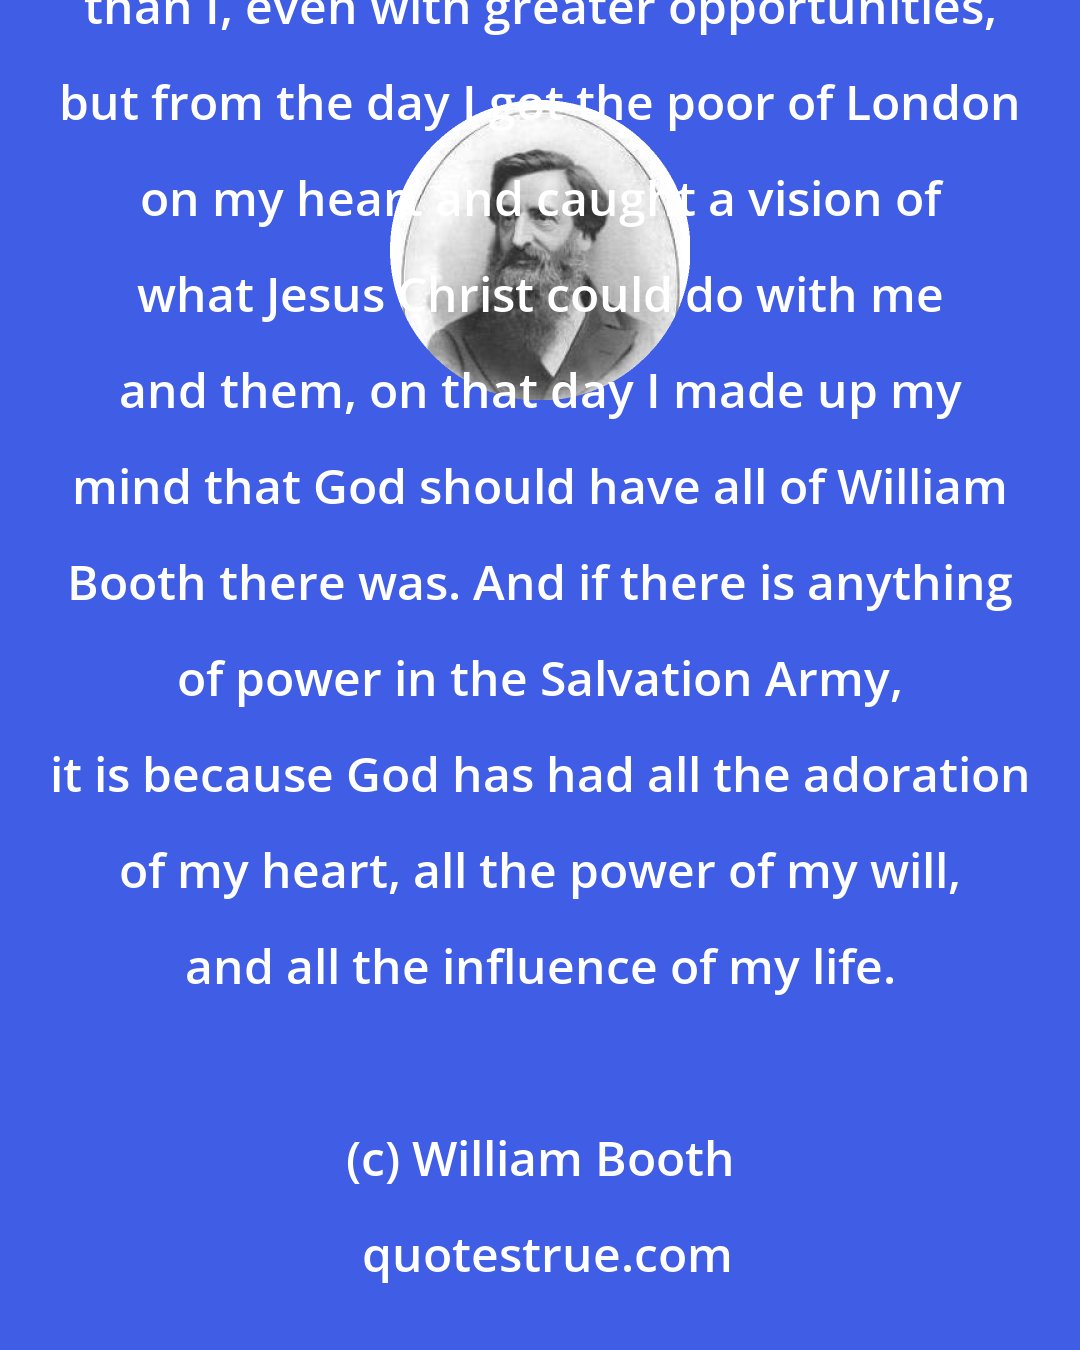 William Booth: I will tell you the secret: God has had all that there was of me. There have been men with greater brains than I, even with greater opportunities, but from the day I got the poor of London on my heart and caught a vision of what Jesus Christ could do with me and them, on that day I made up my mind that God should have all of William Booth there was. And if there is anything of power in the Salvation Army, it is because God has had all the adoration of my heart, all the power of my will, and all the influence of my life.